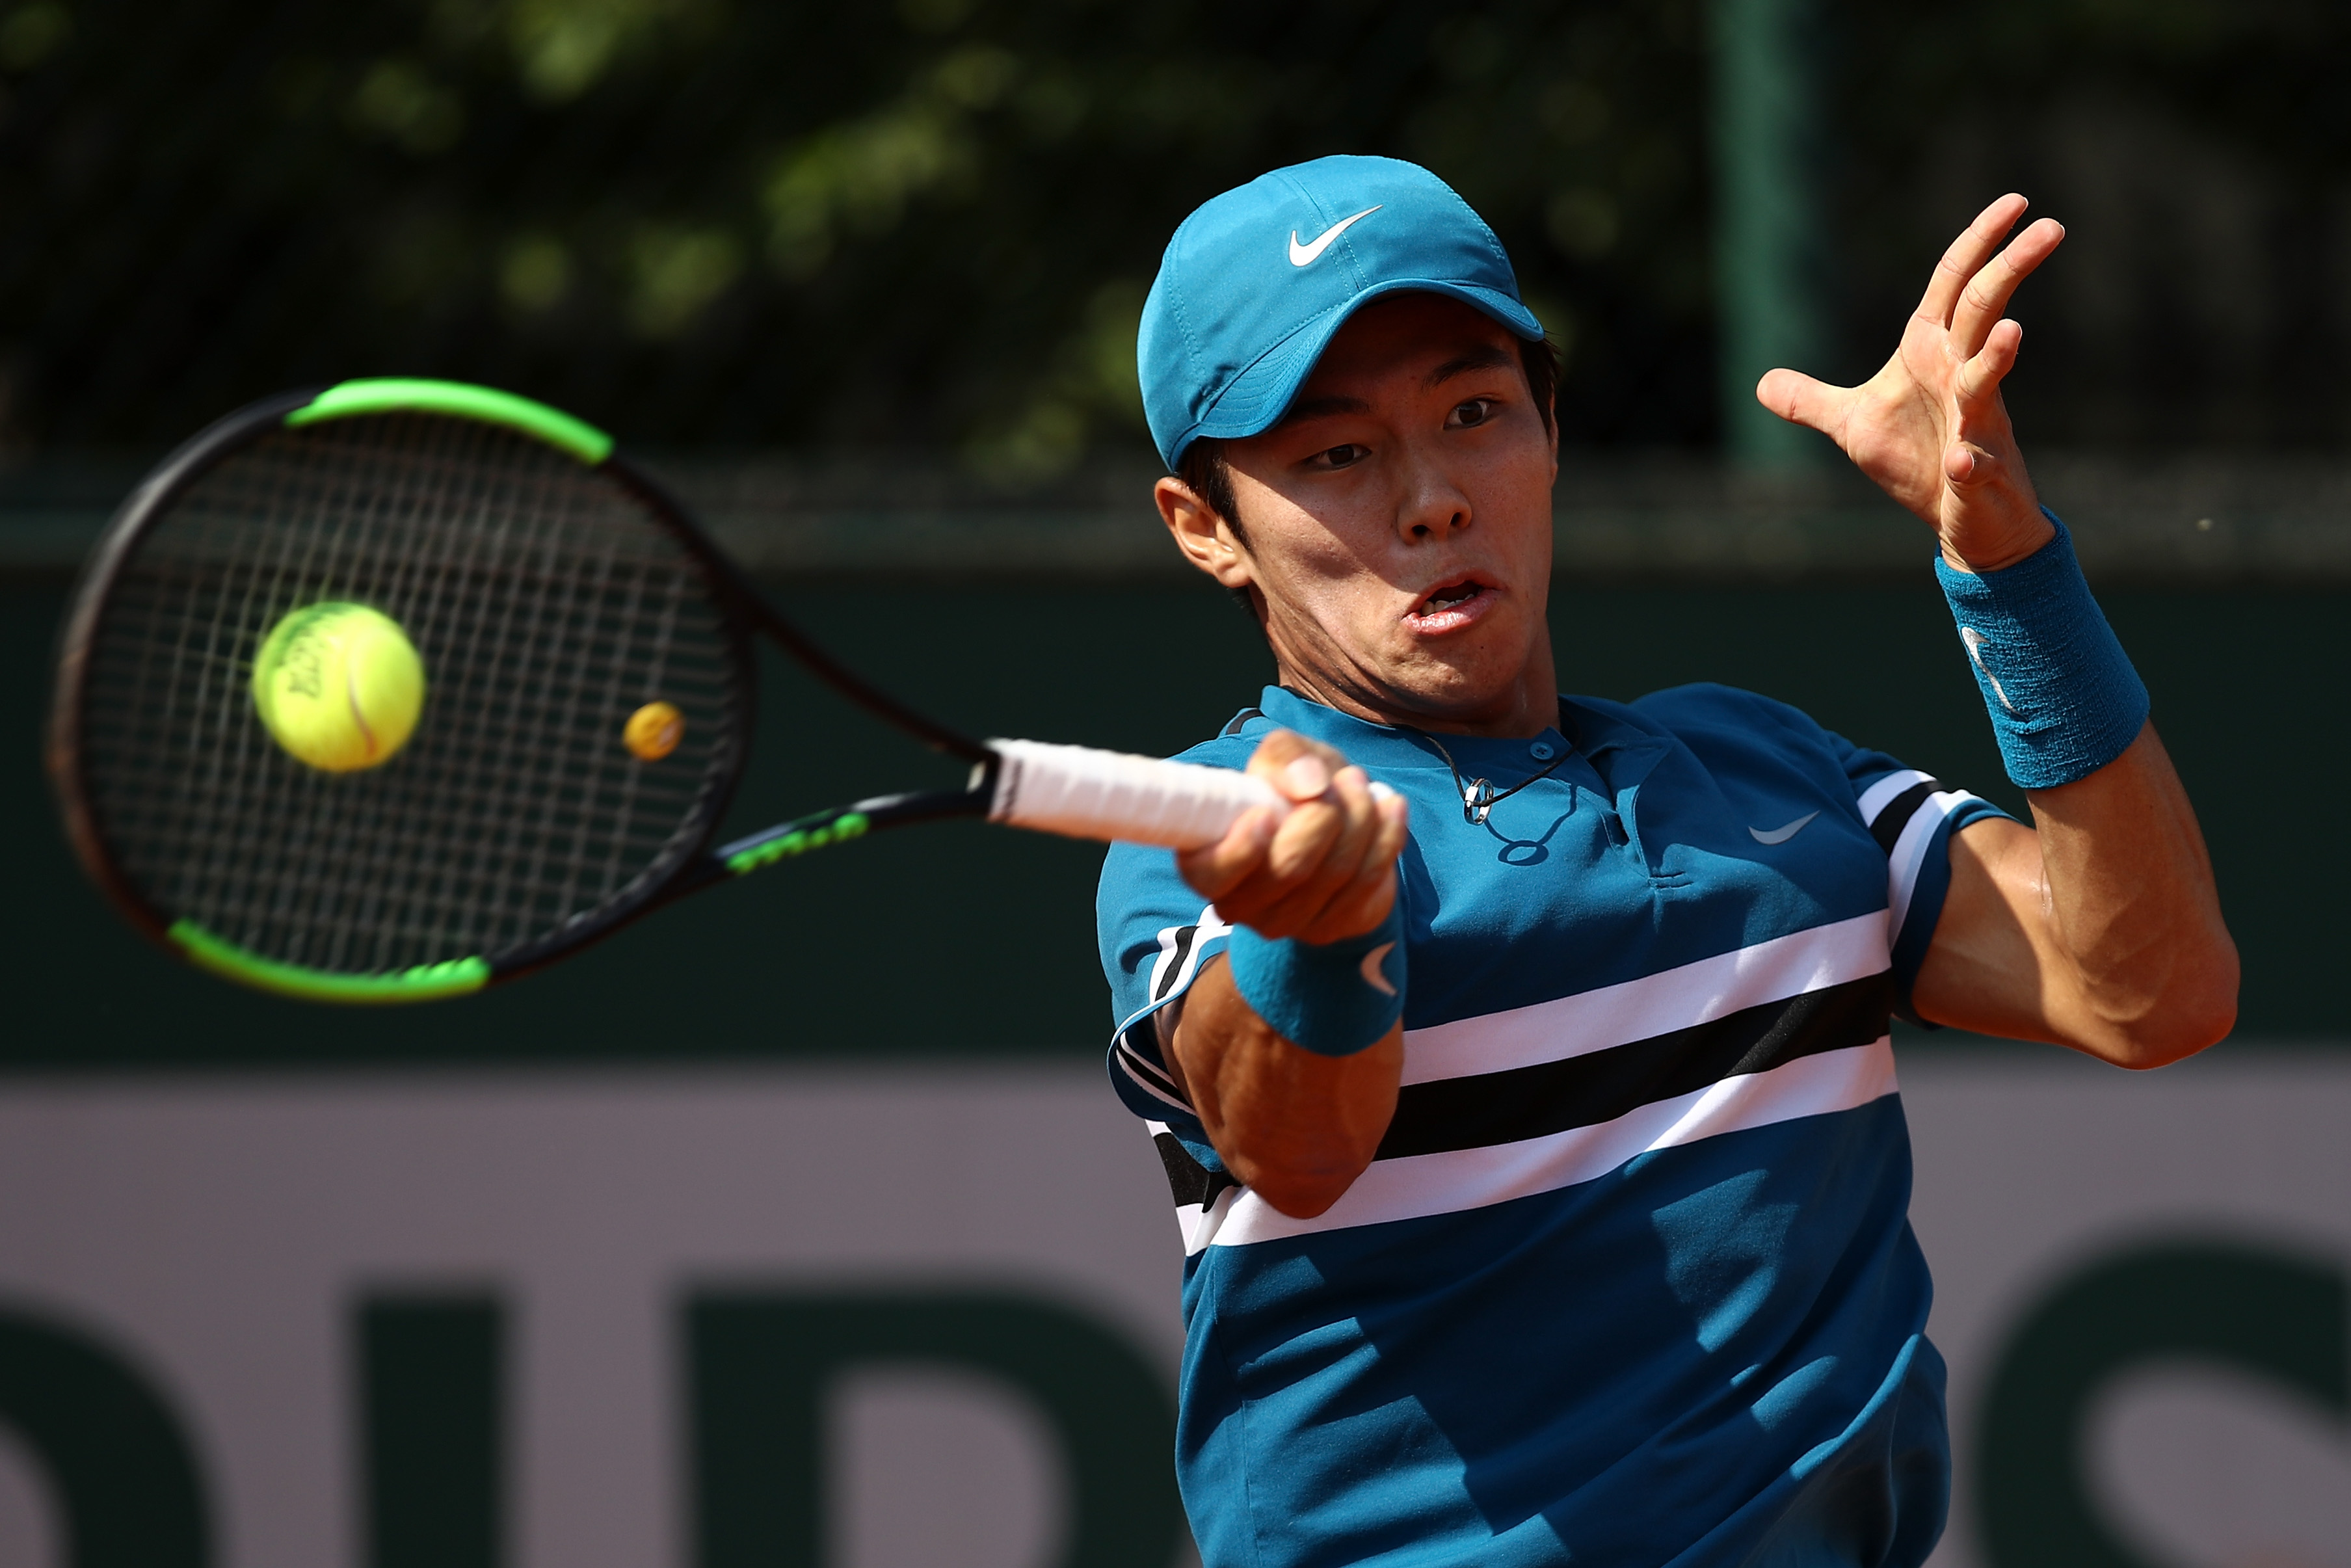 Duckhee Lee becomes first deaf player to win an ATP main draw match